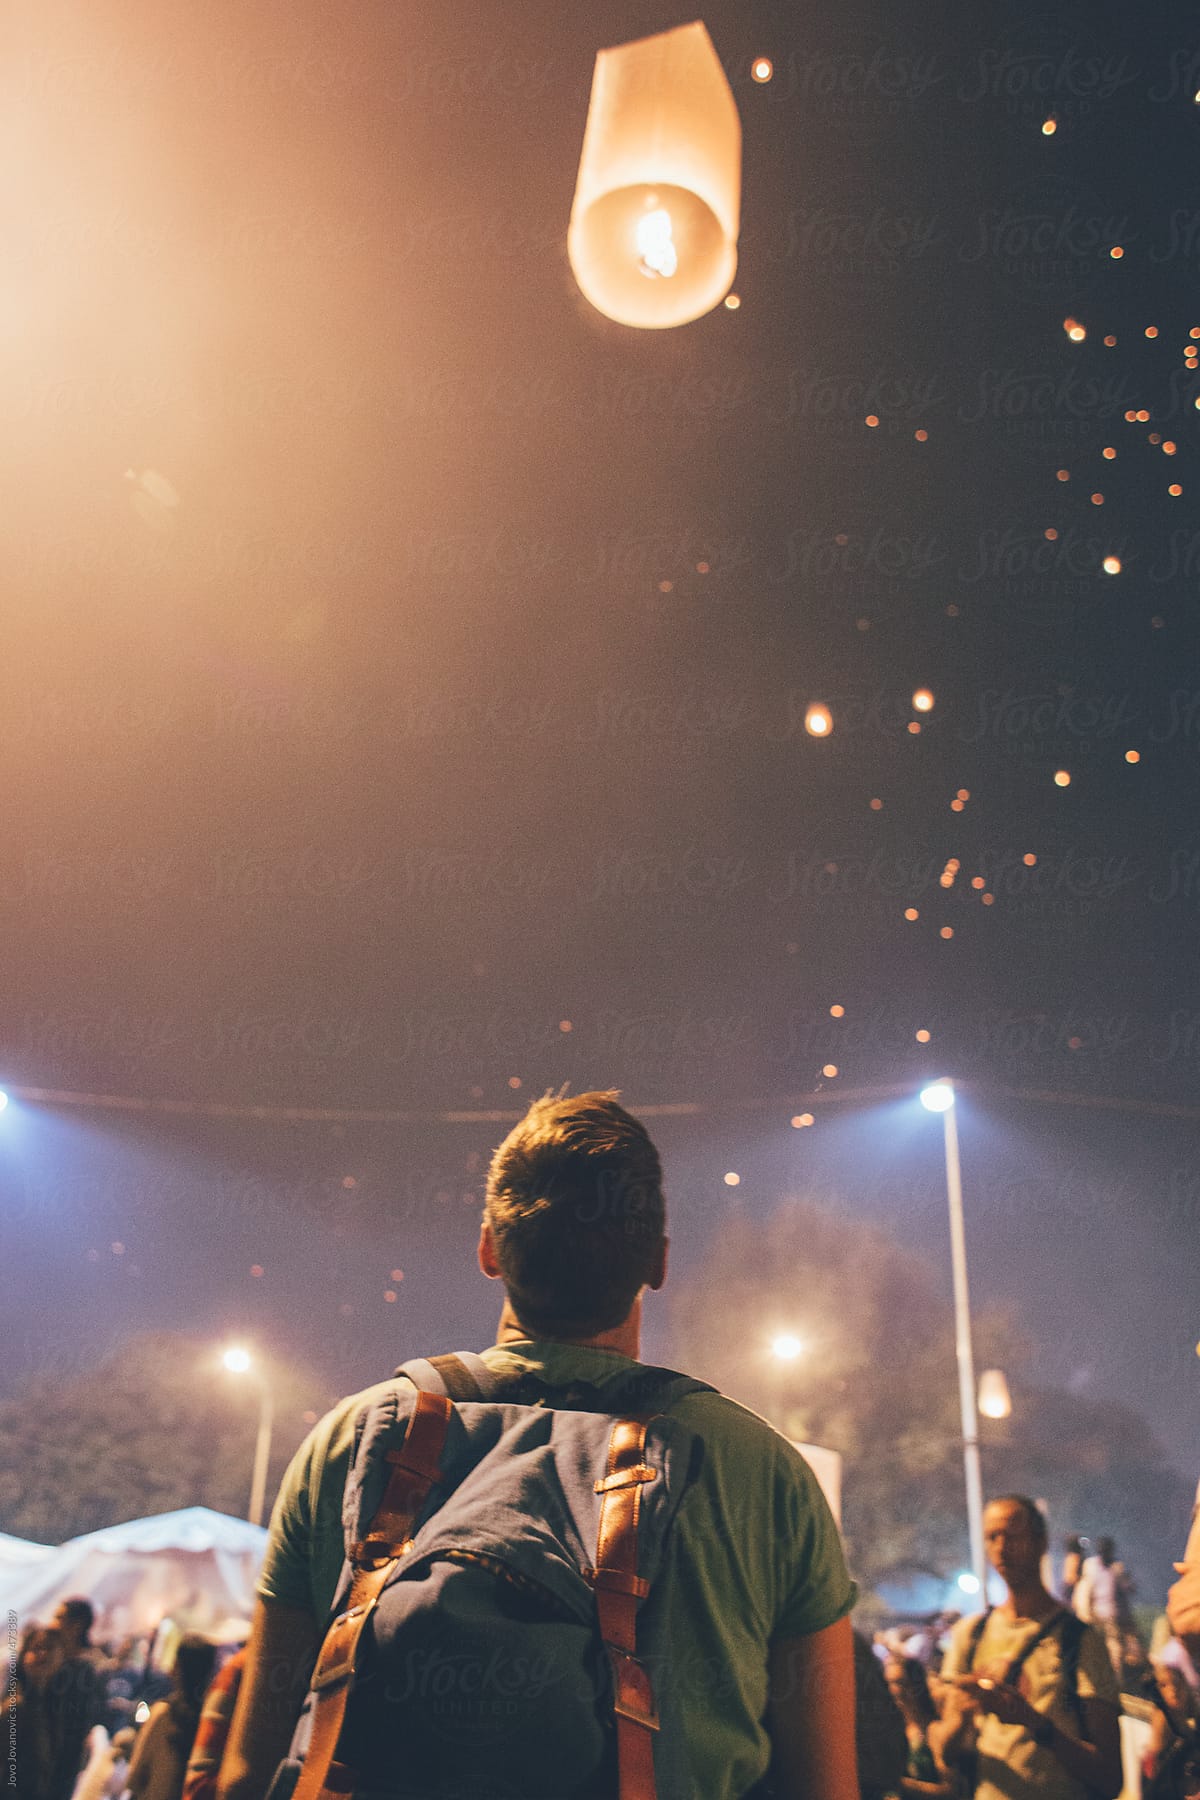 Festival time - Young man looking at fire lanterns and the sky during the night